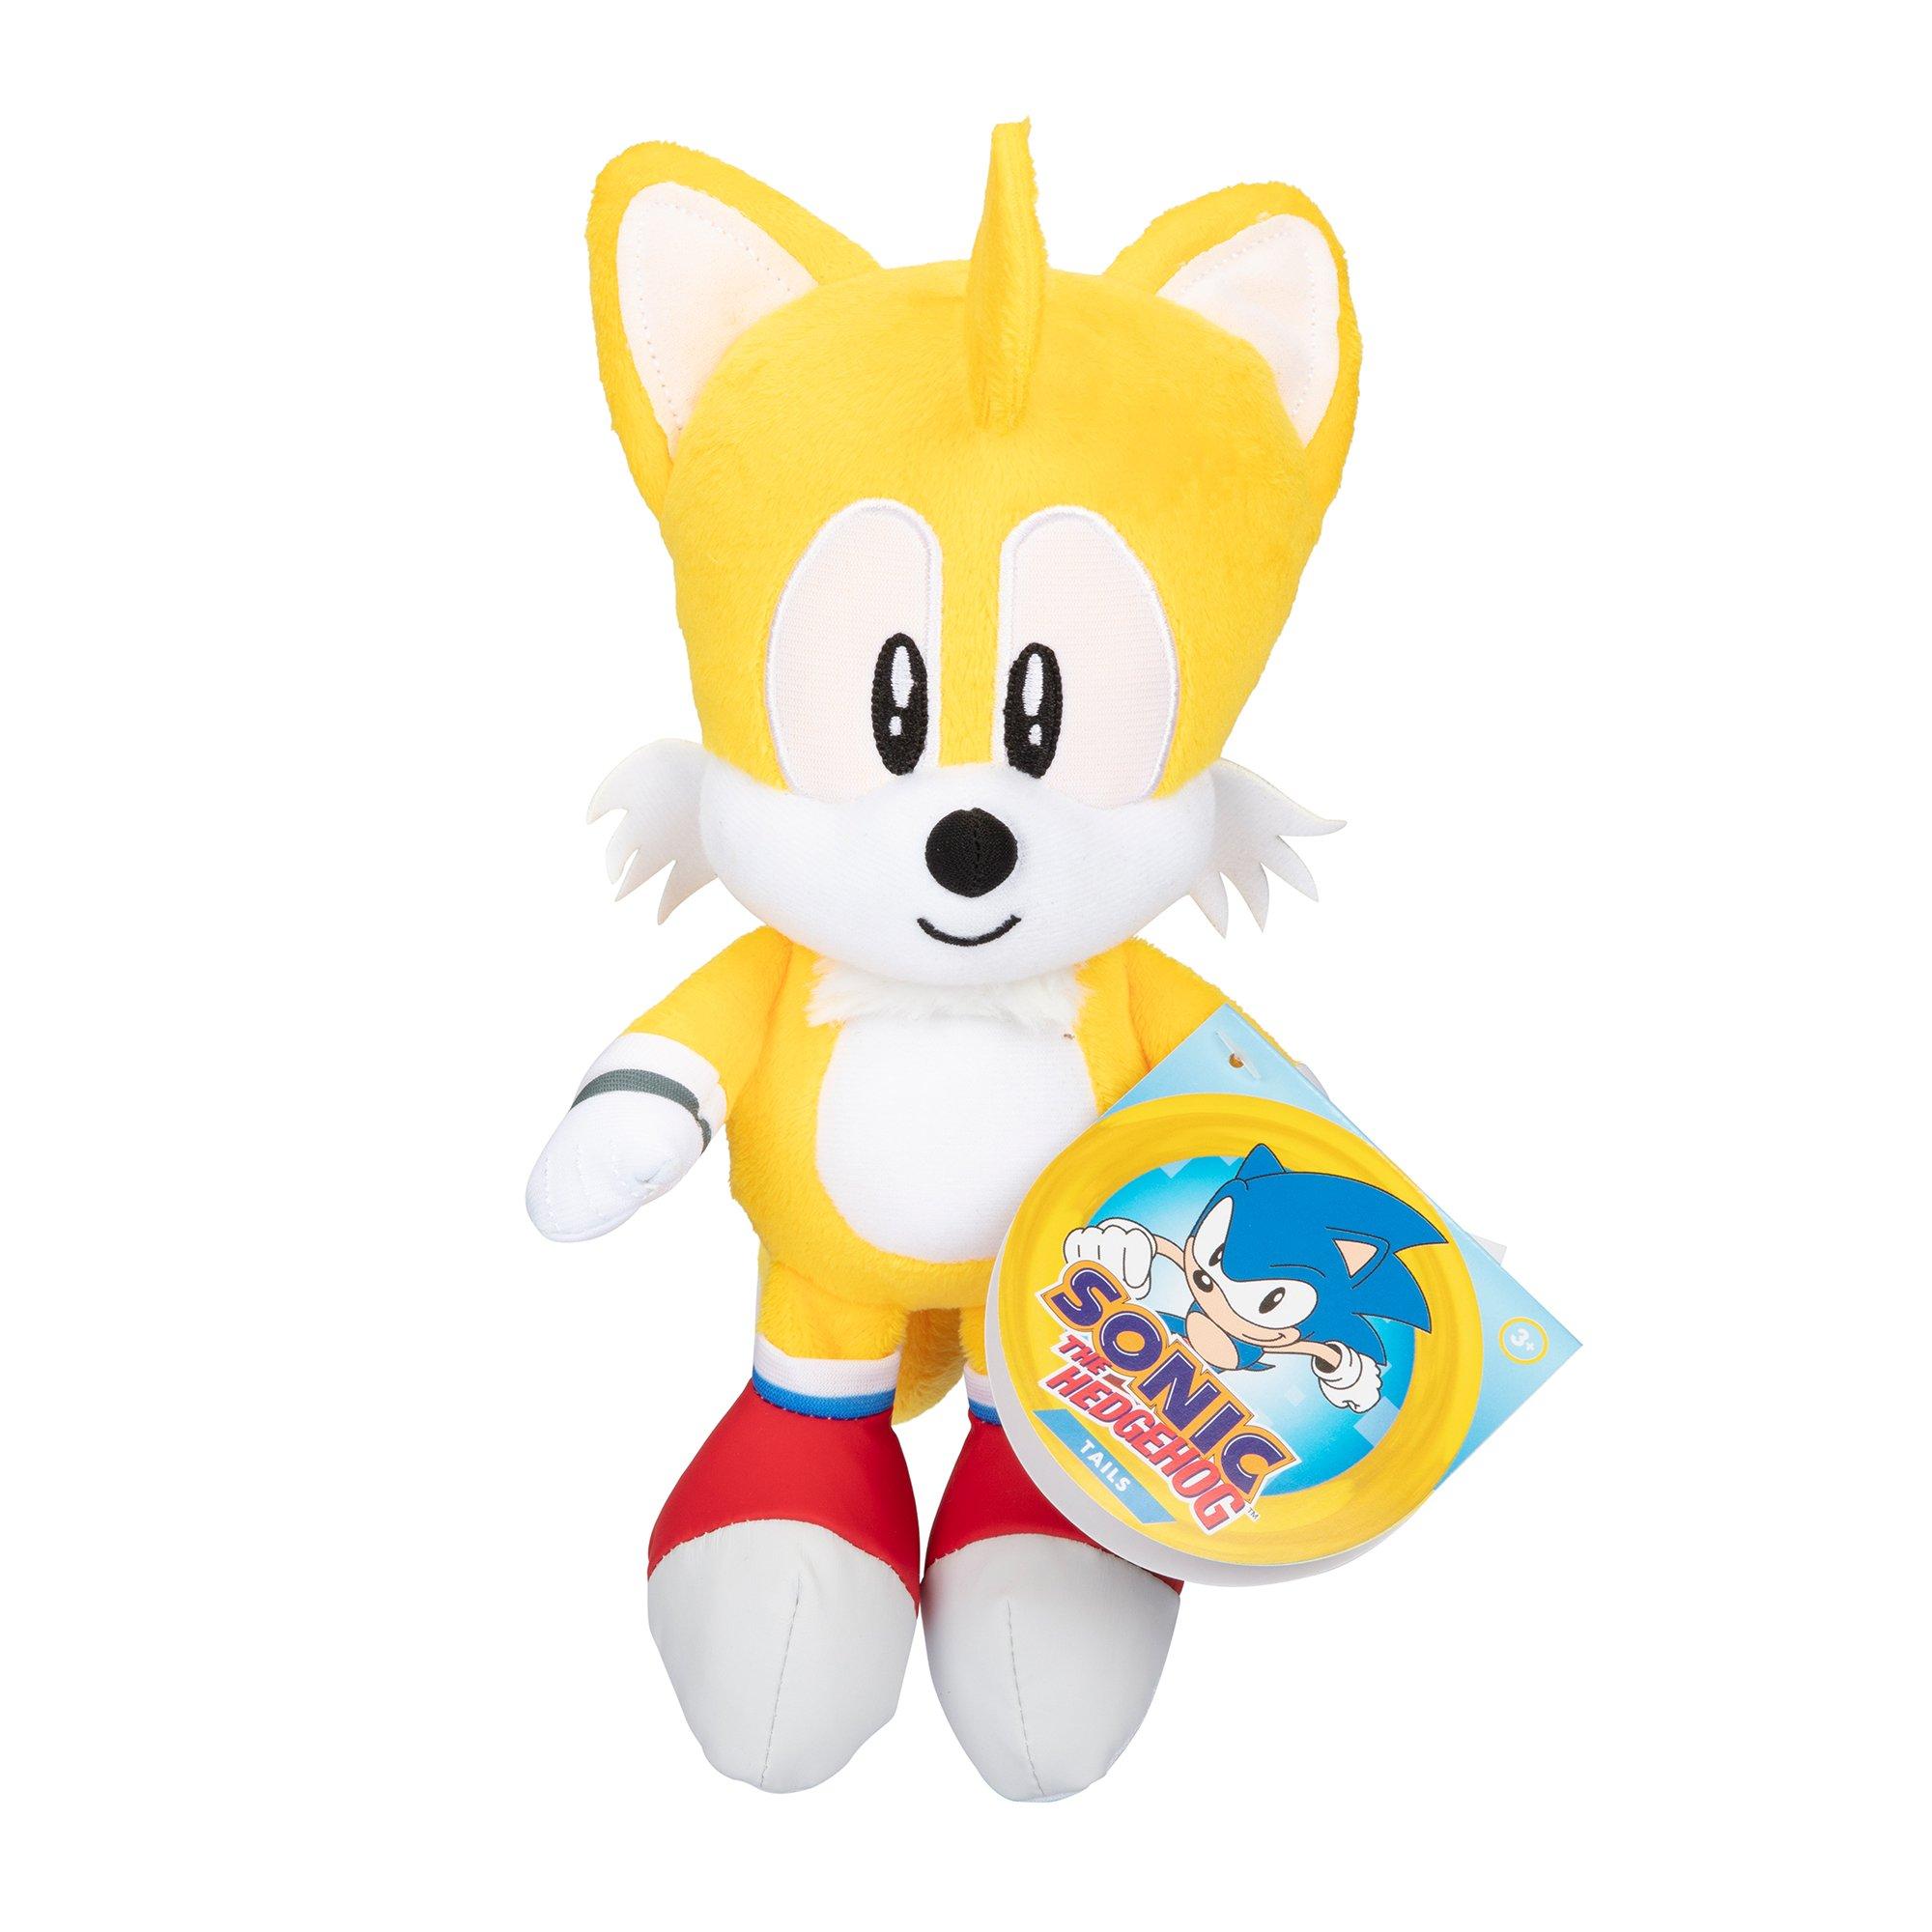 Sonic The Hedgehog - Mighty the Armadillo 9 Plush